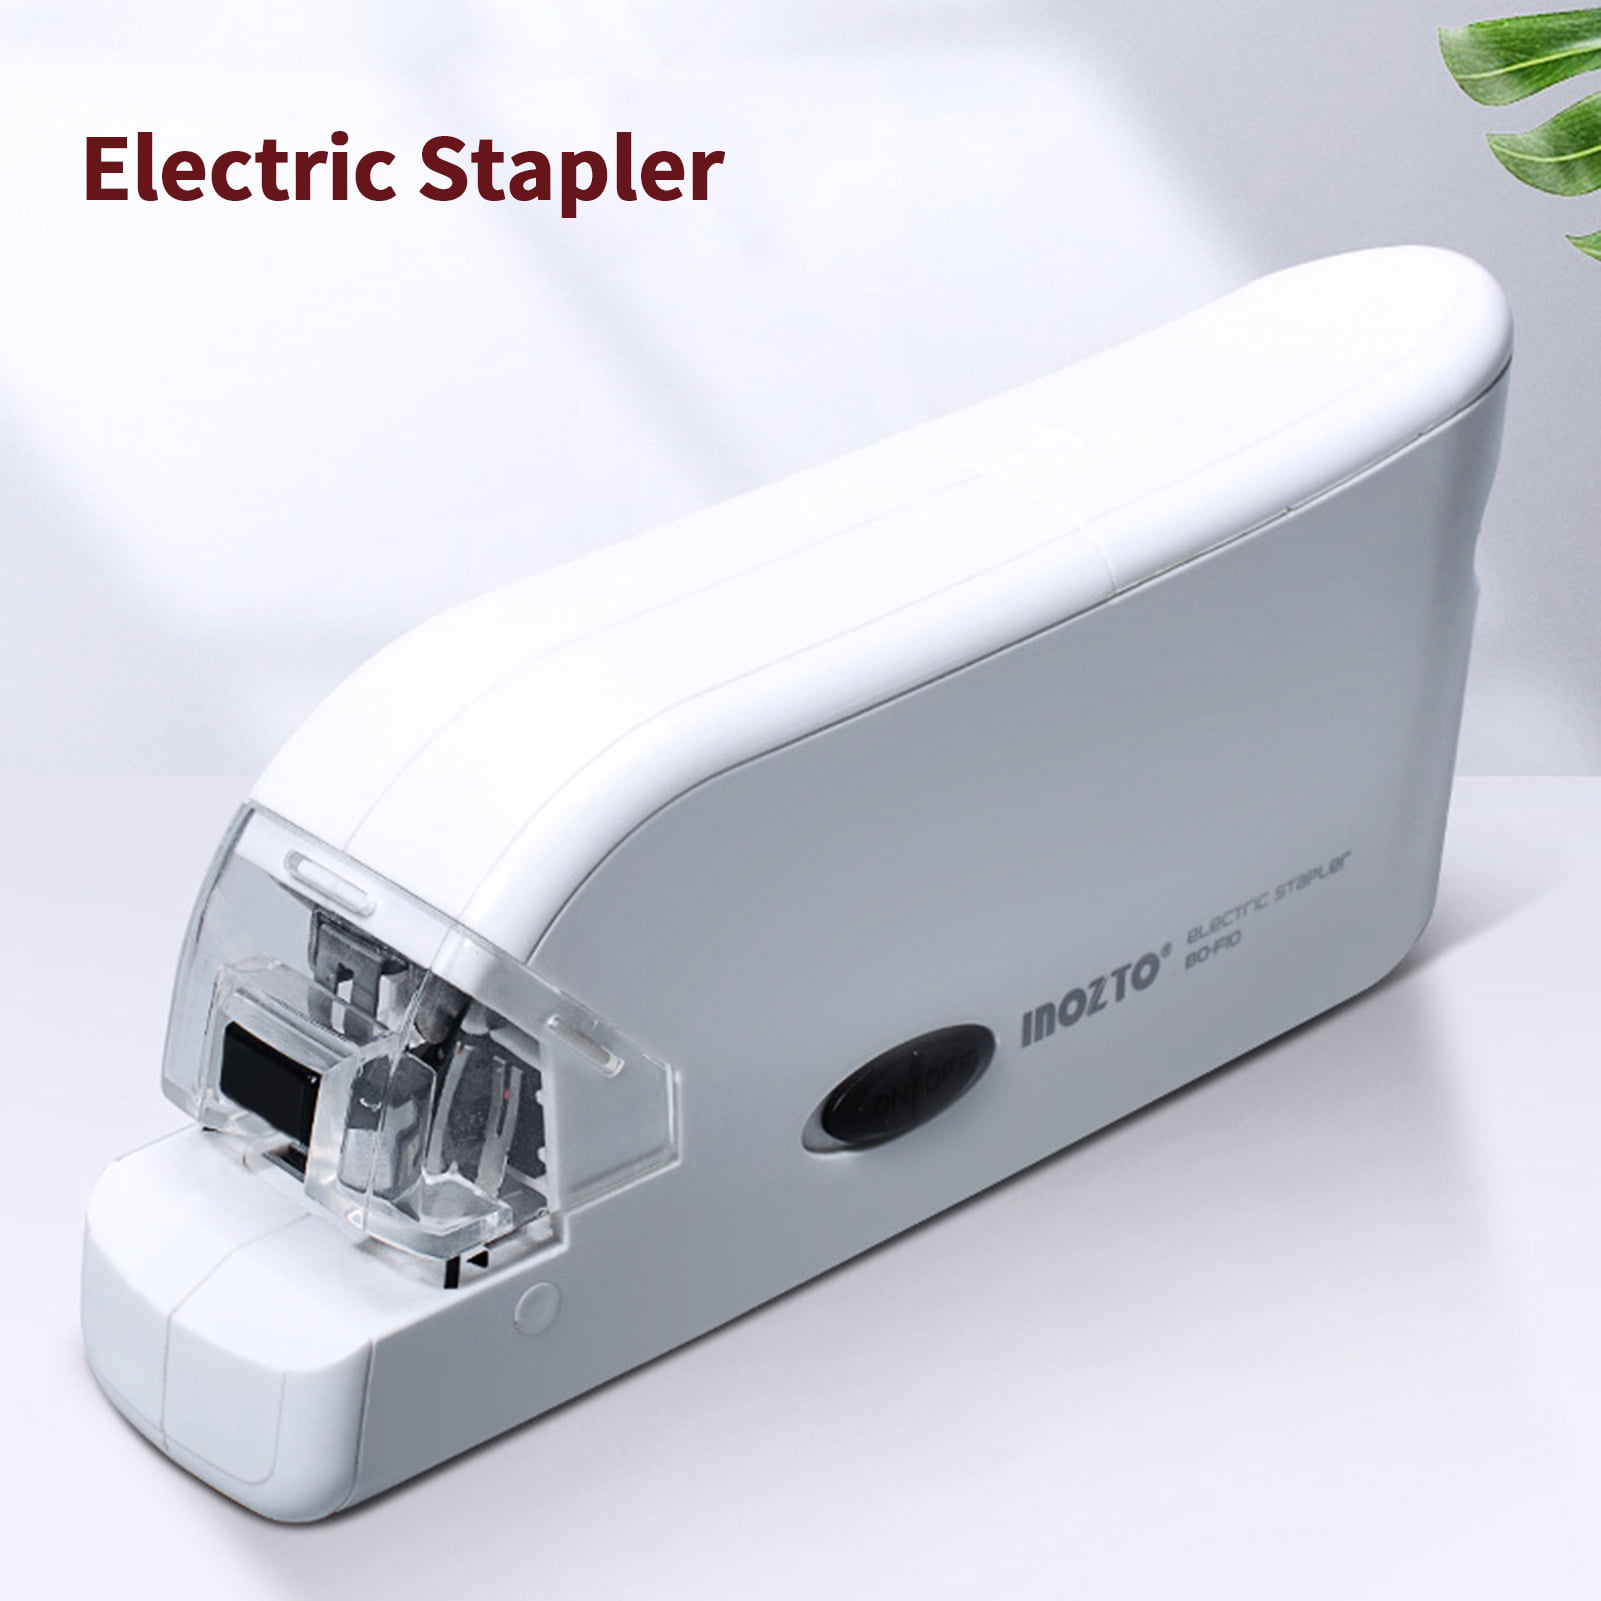 Staright Automatic Electric Stapler 20 Sheet Capacity with Extra Staple Storage Warehouse Non-Slip Desktop Office Stapler Less Effort for Home Office School Supplies Battery Power Supply